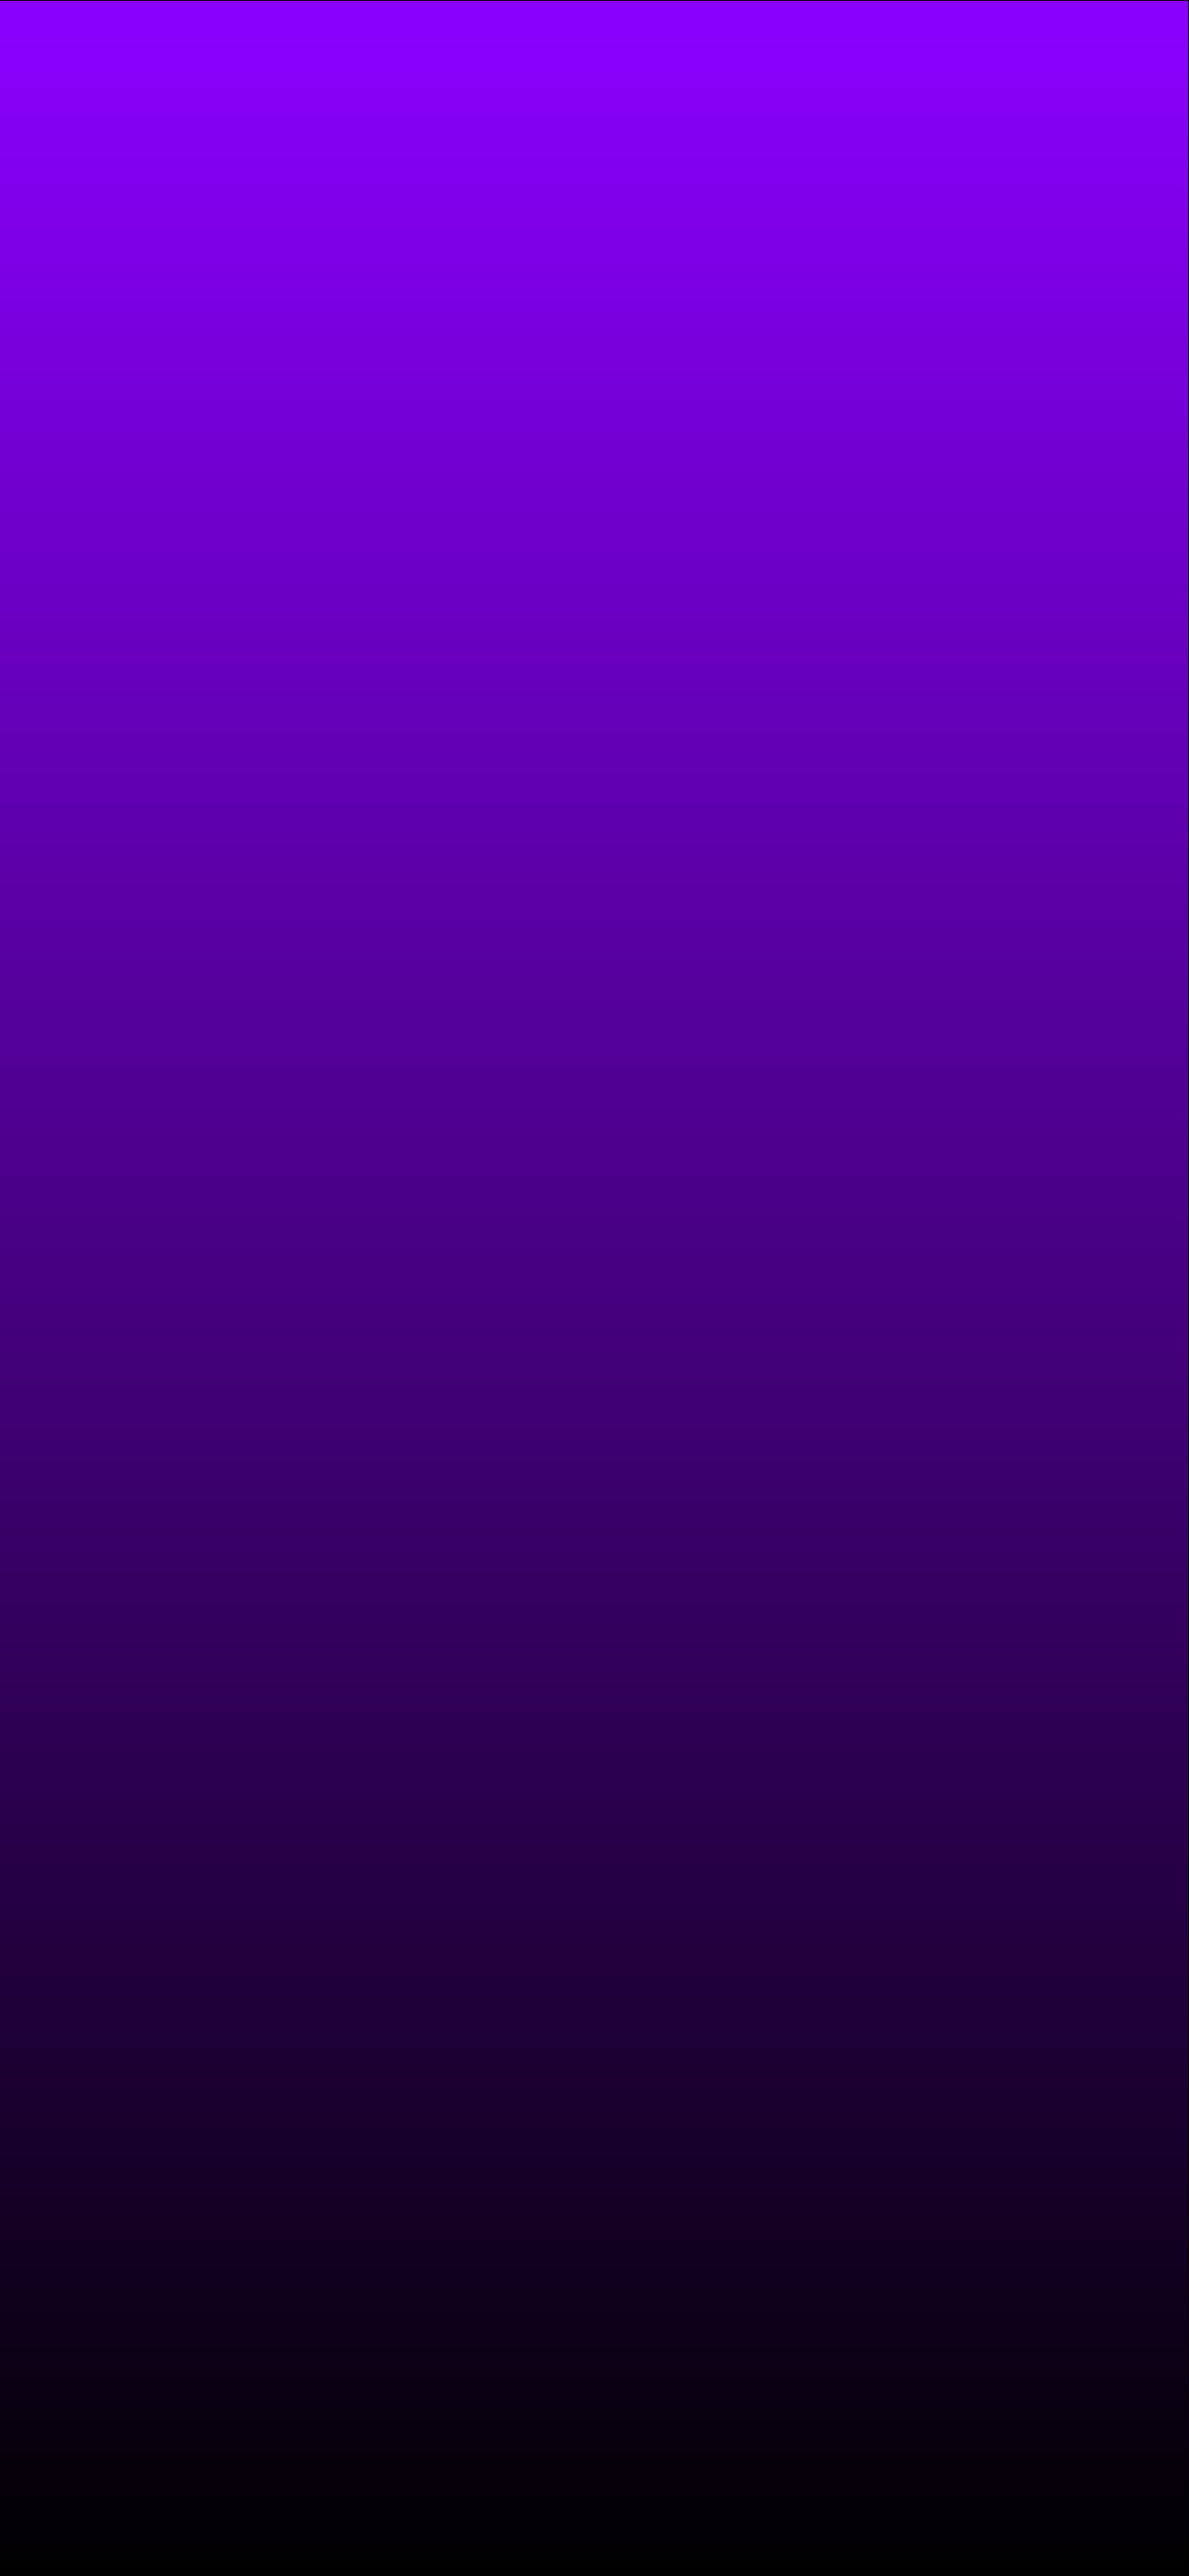 Best Gradient Wallpaper for iPhone & Android 4K Resolution